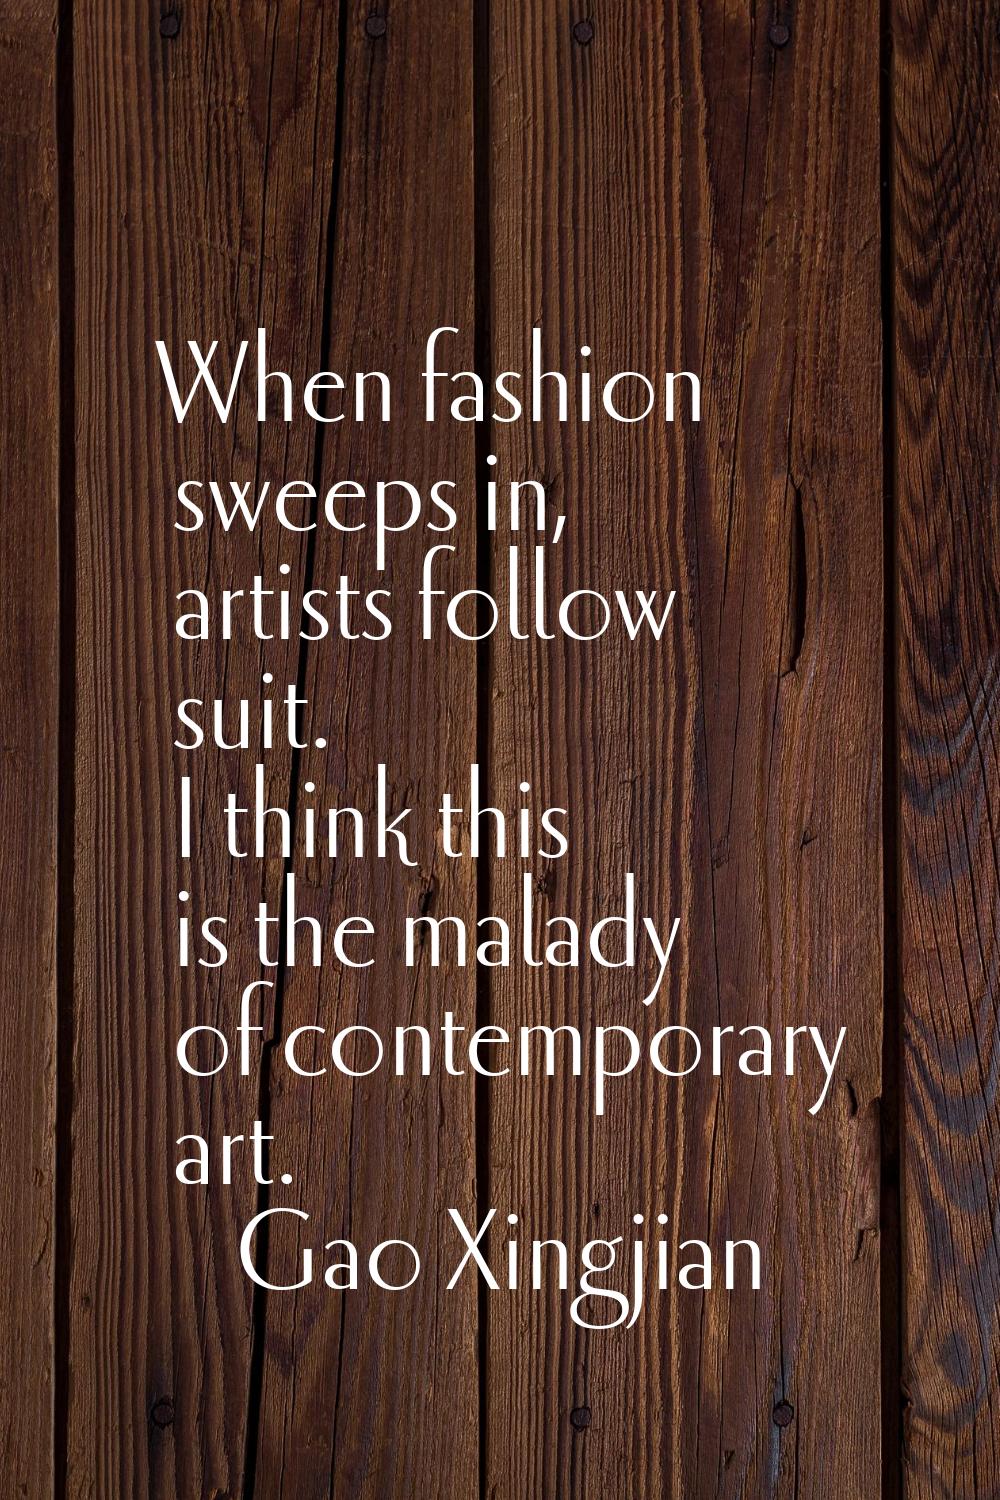 When fashion sweeps in, artists follow suit. I think this is the malady of contemporary art.